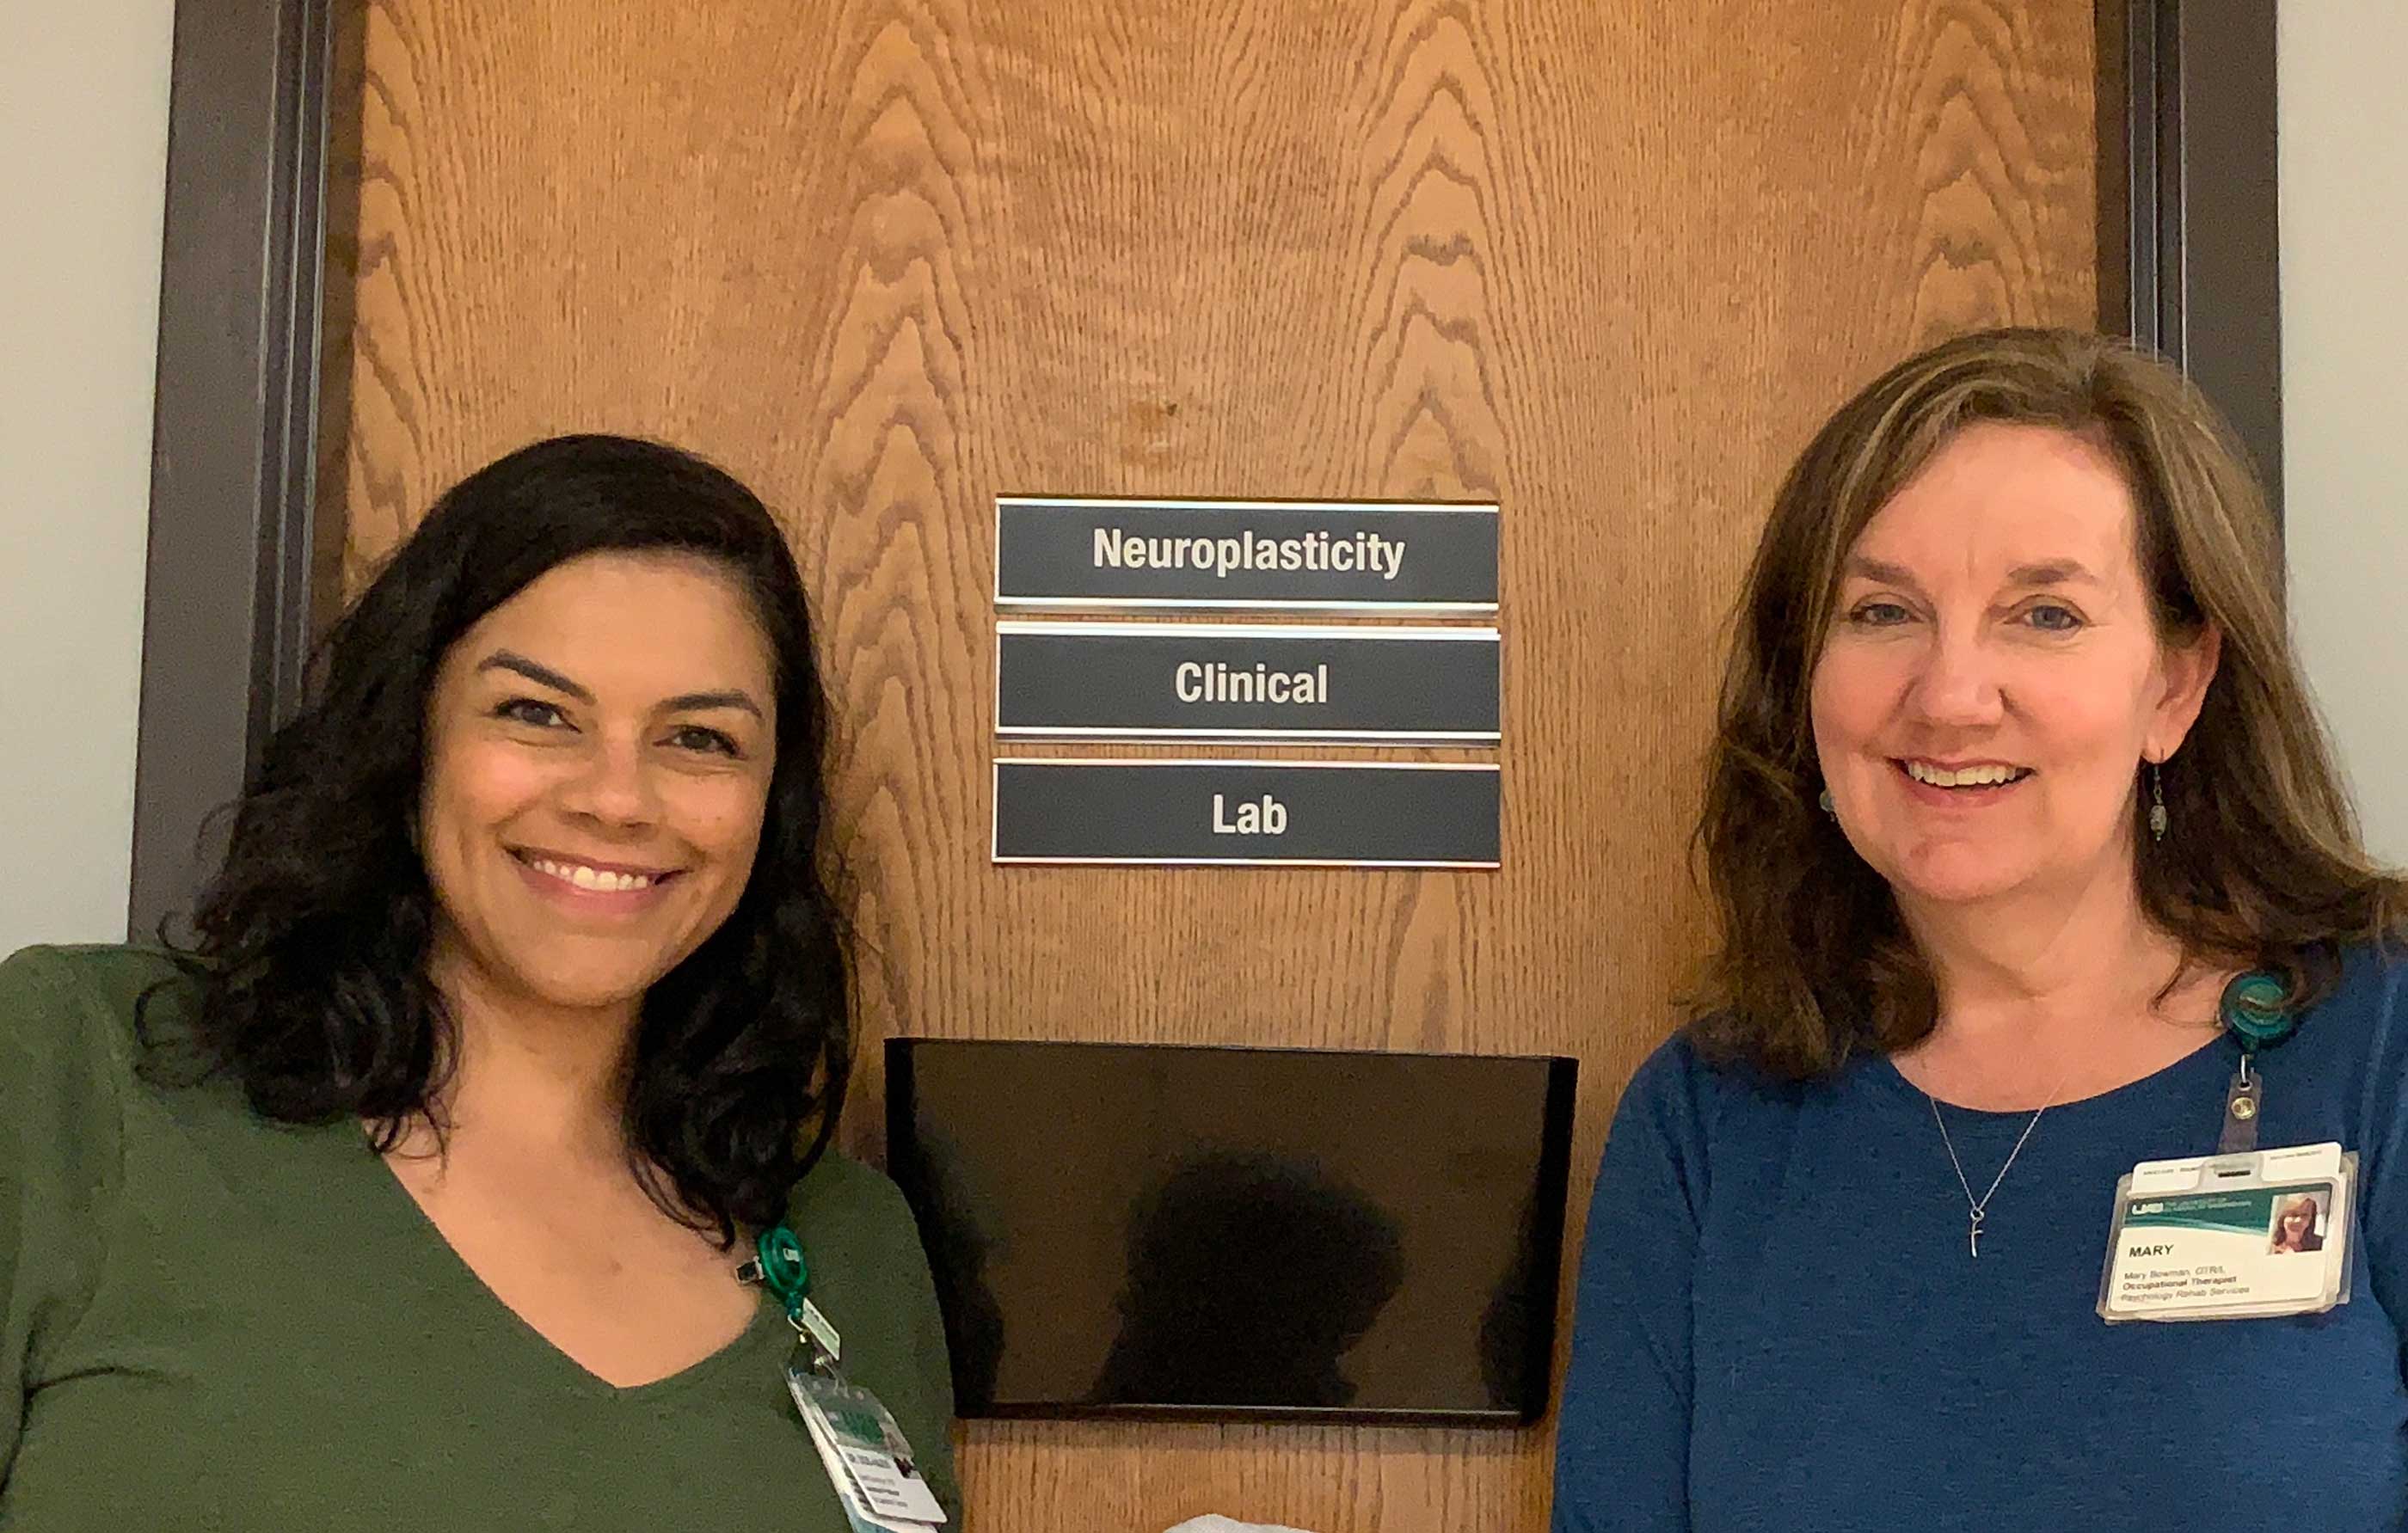 Dr. dos Anjos and Ms. Bowman outside the Neuroplasticity Clinical Lab they plan to expand into a clinical practice for individuals with stroke.